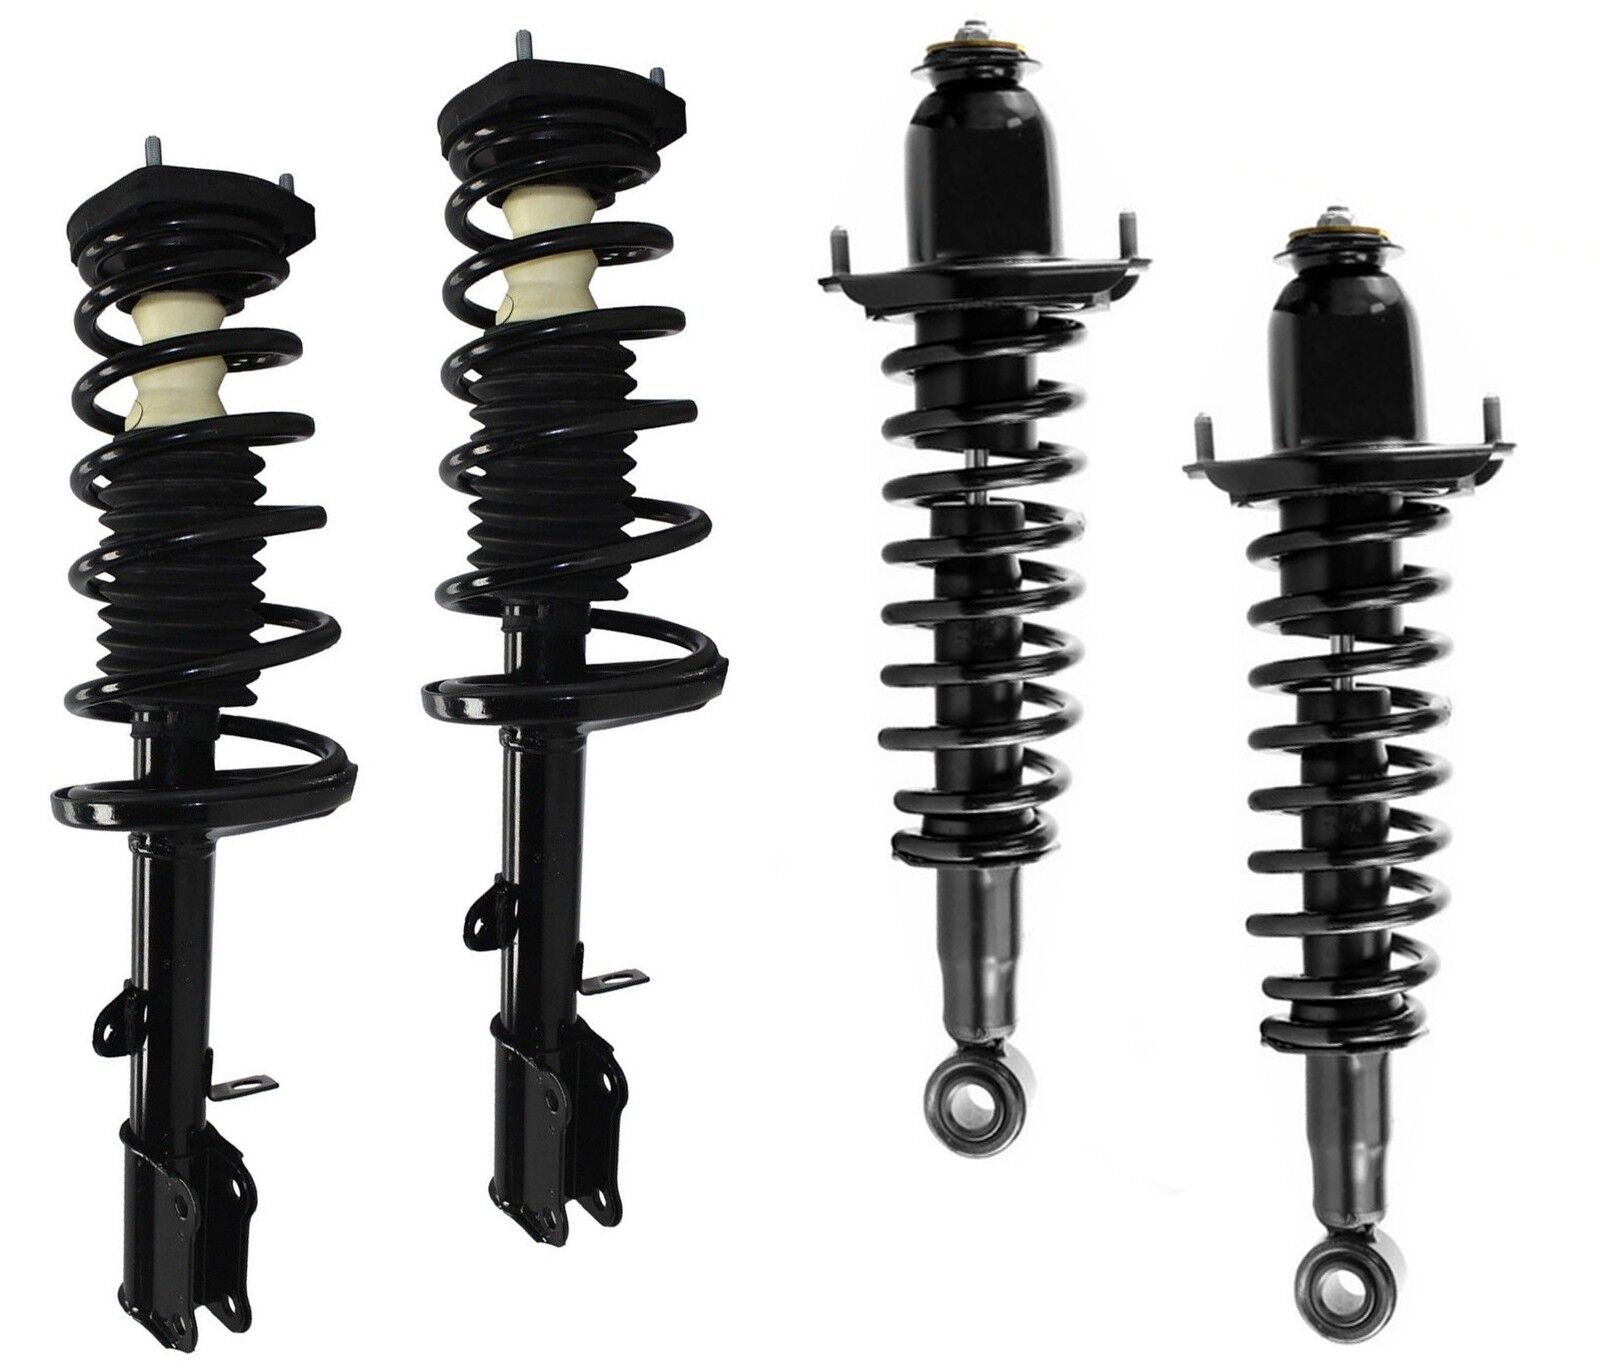 Full Set - 4 New Complete Struts With Springs Mounts Fit Matrix Vibe FWD